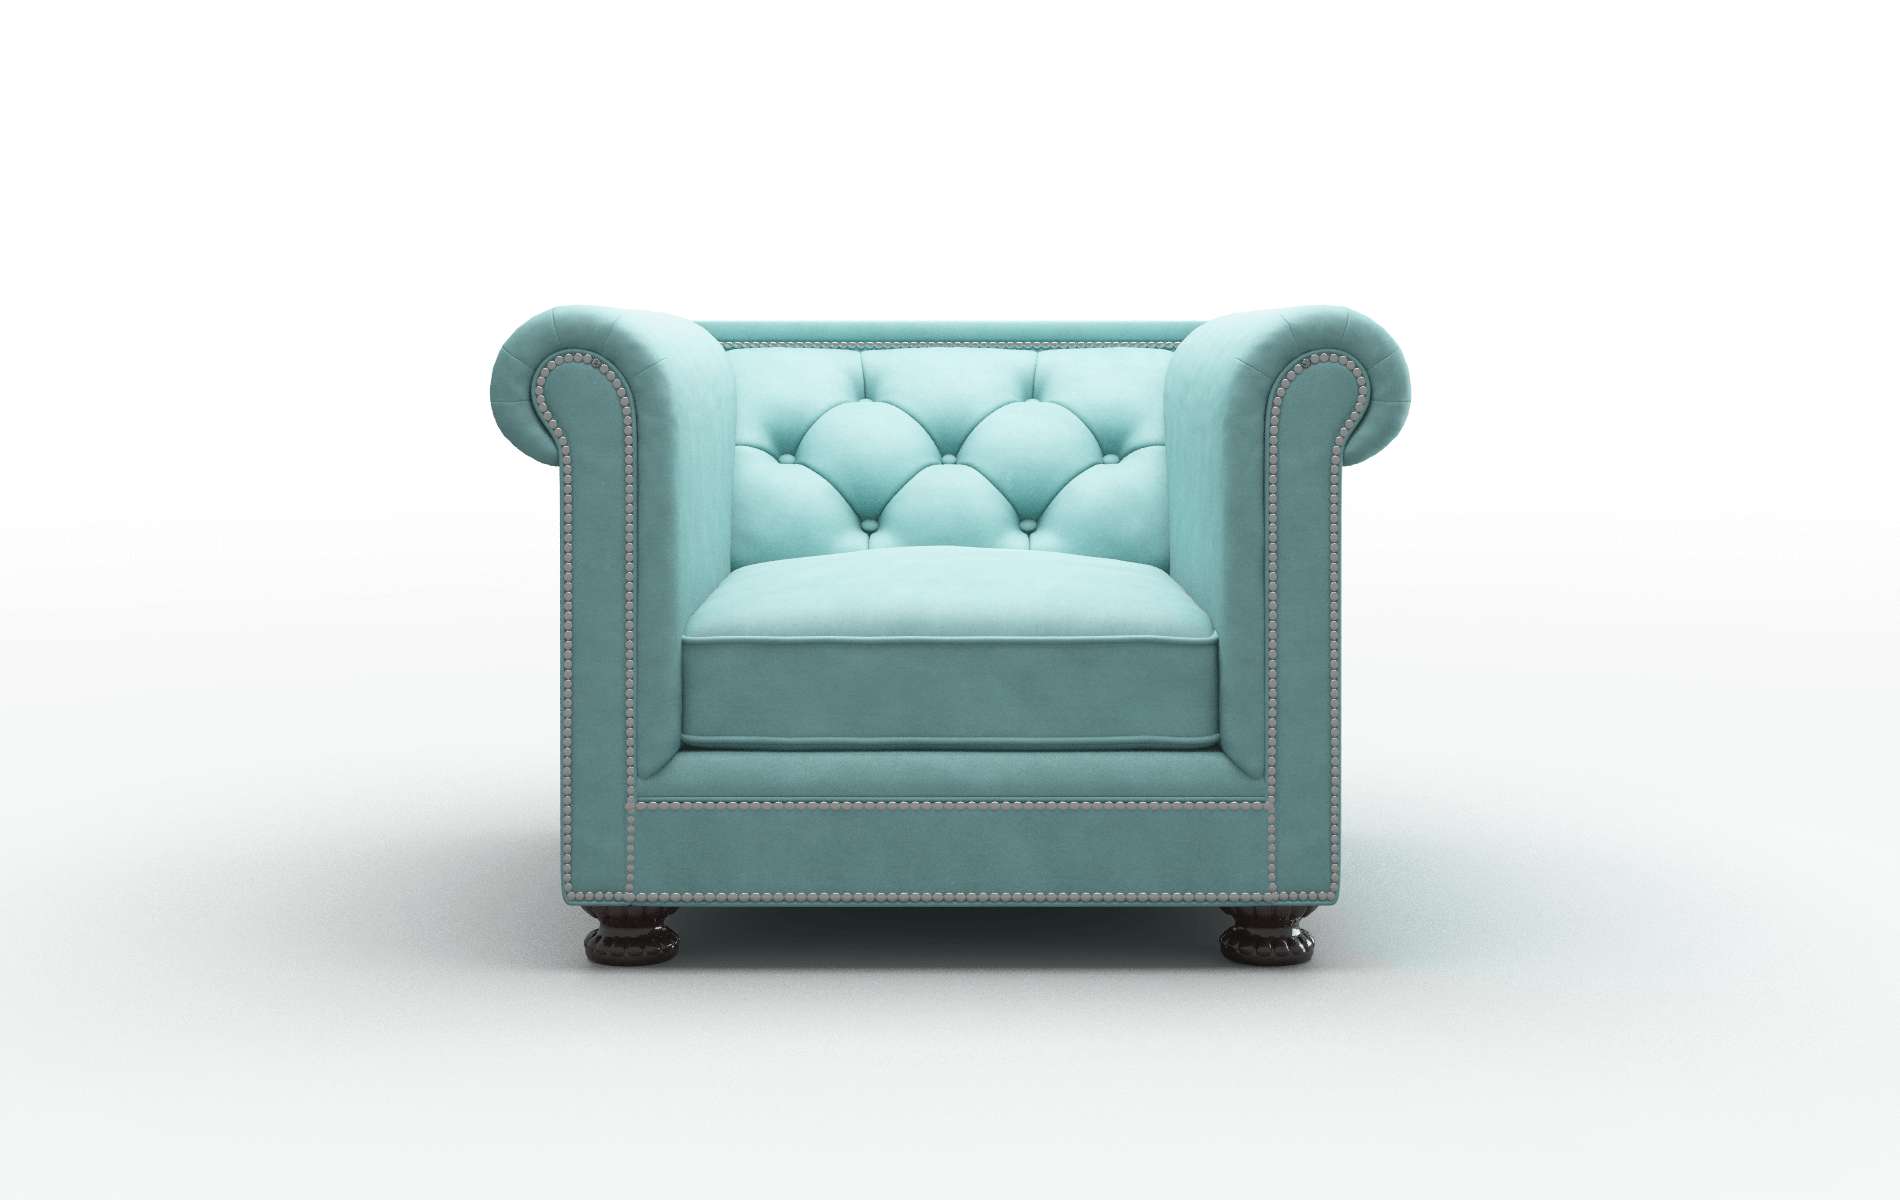 Athens Curious Turquoise Chair espresso legs 1